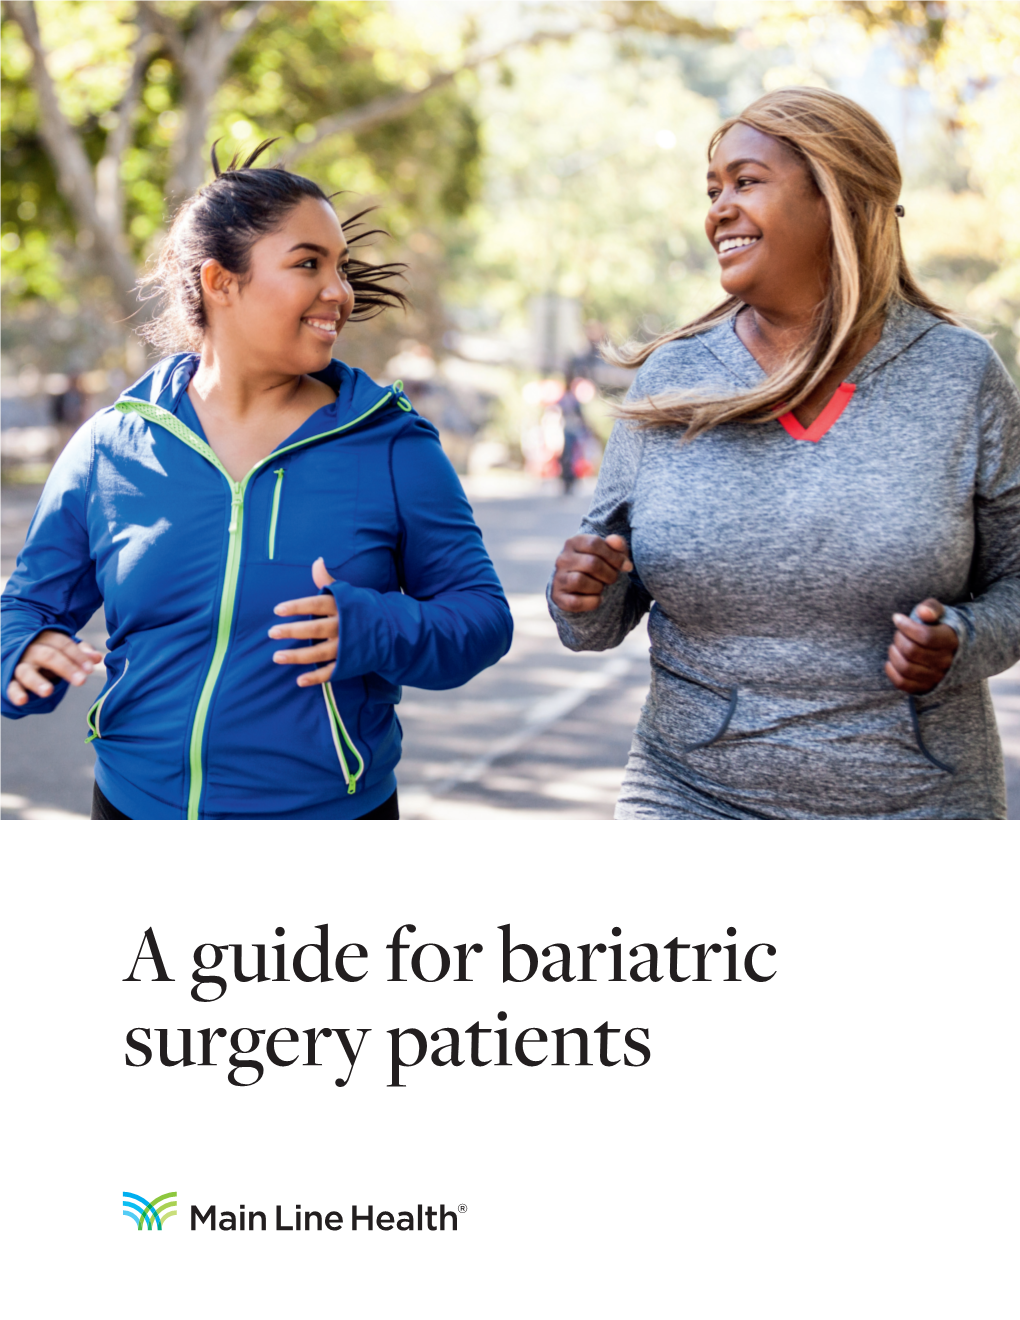 A Guide for Bariatric Surgery Patients